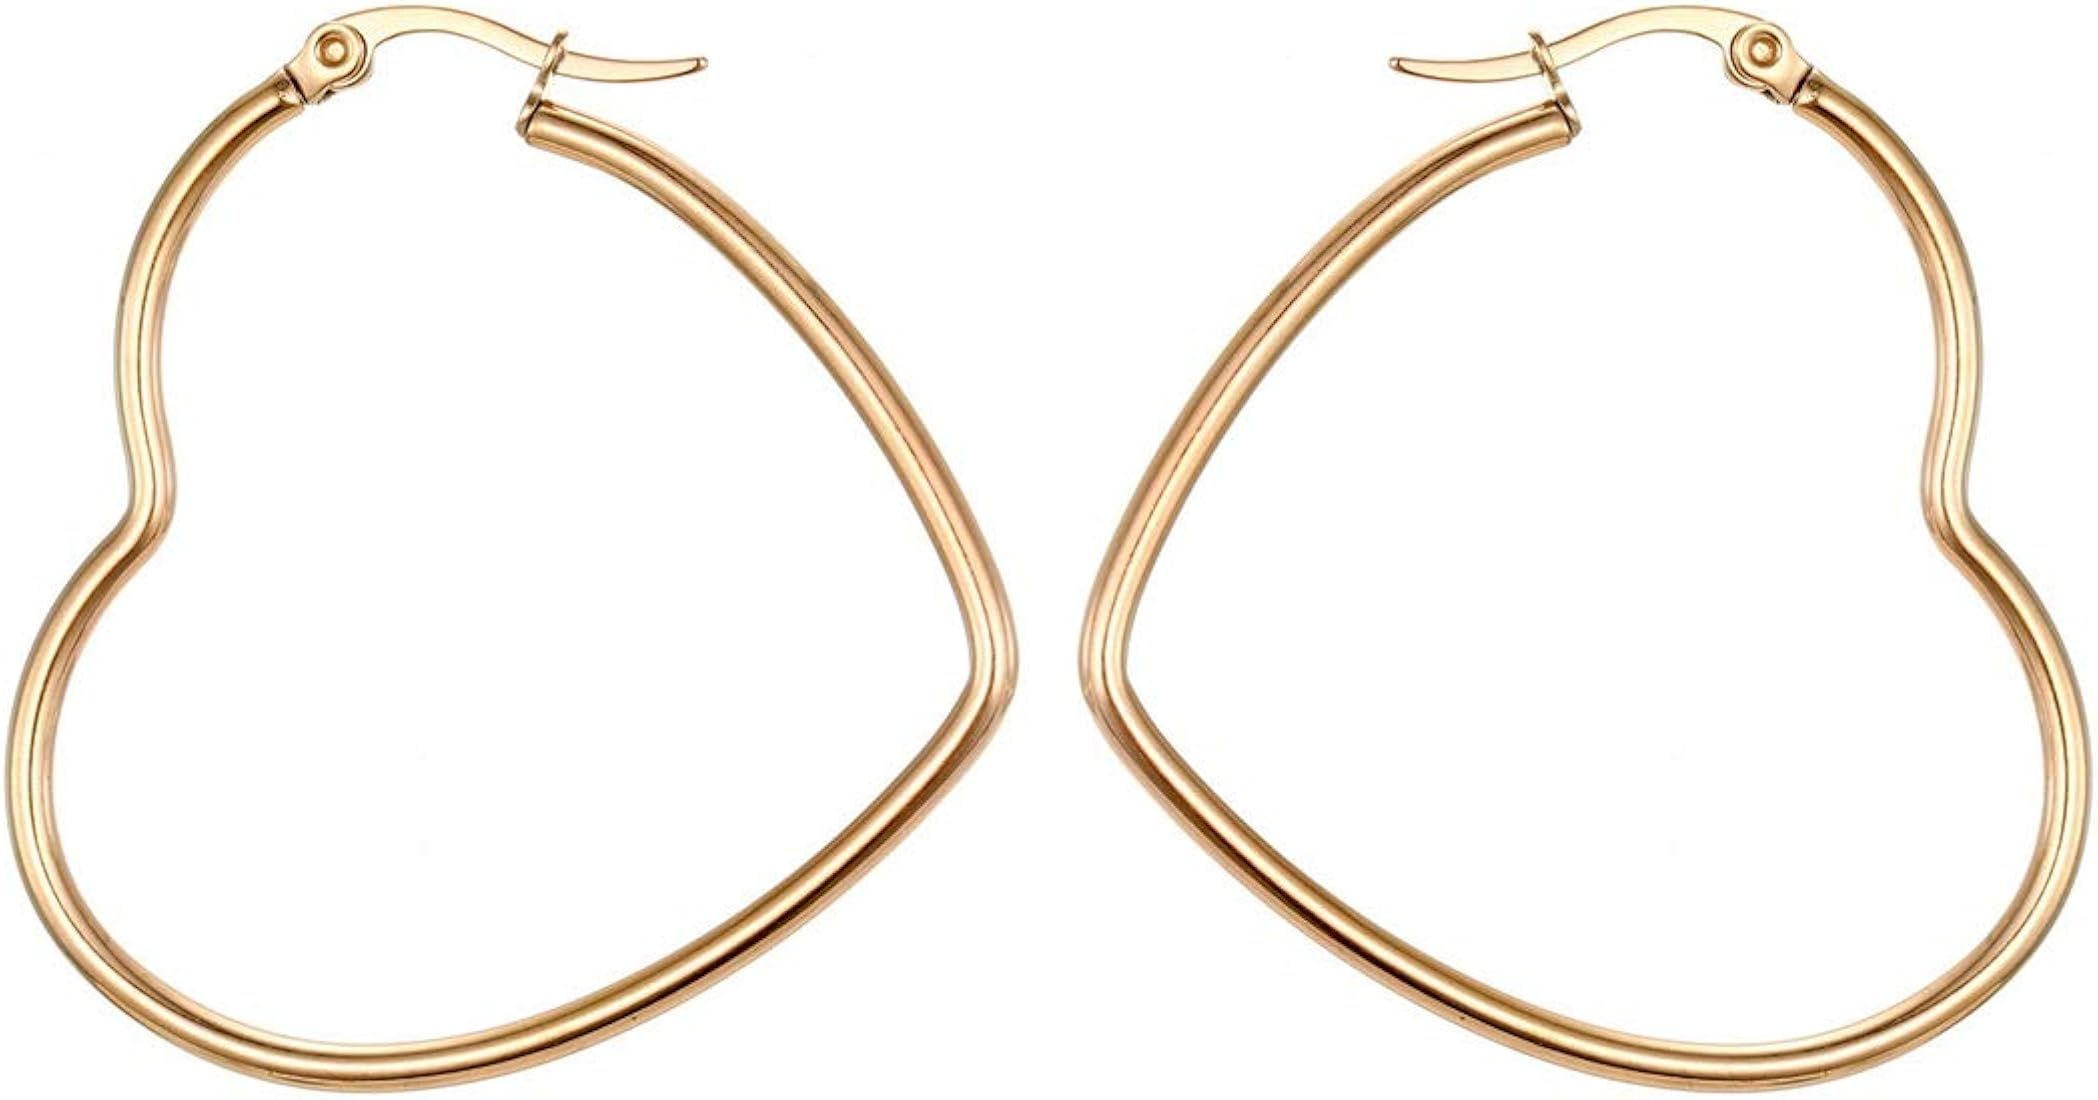 MengPa Hoop Earrings for Women Stainless Steel or Black Gold Plated Lightweight Jewelry | Amazon (US)